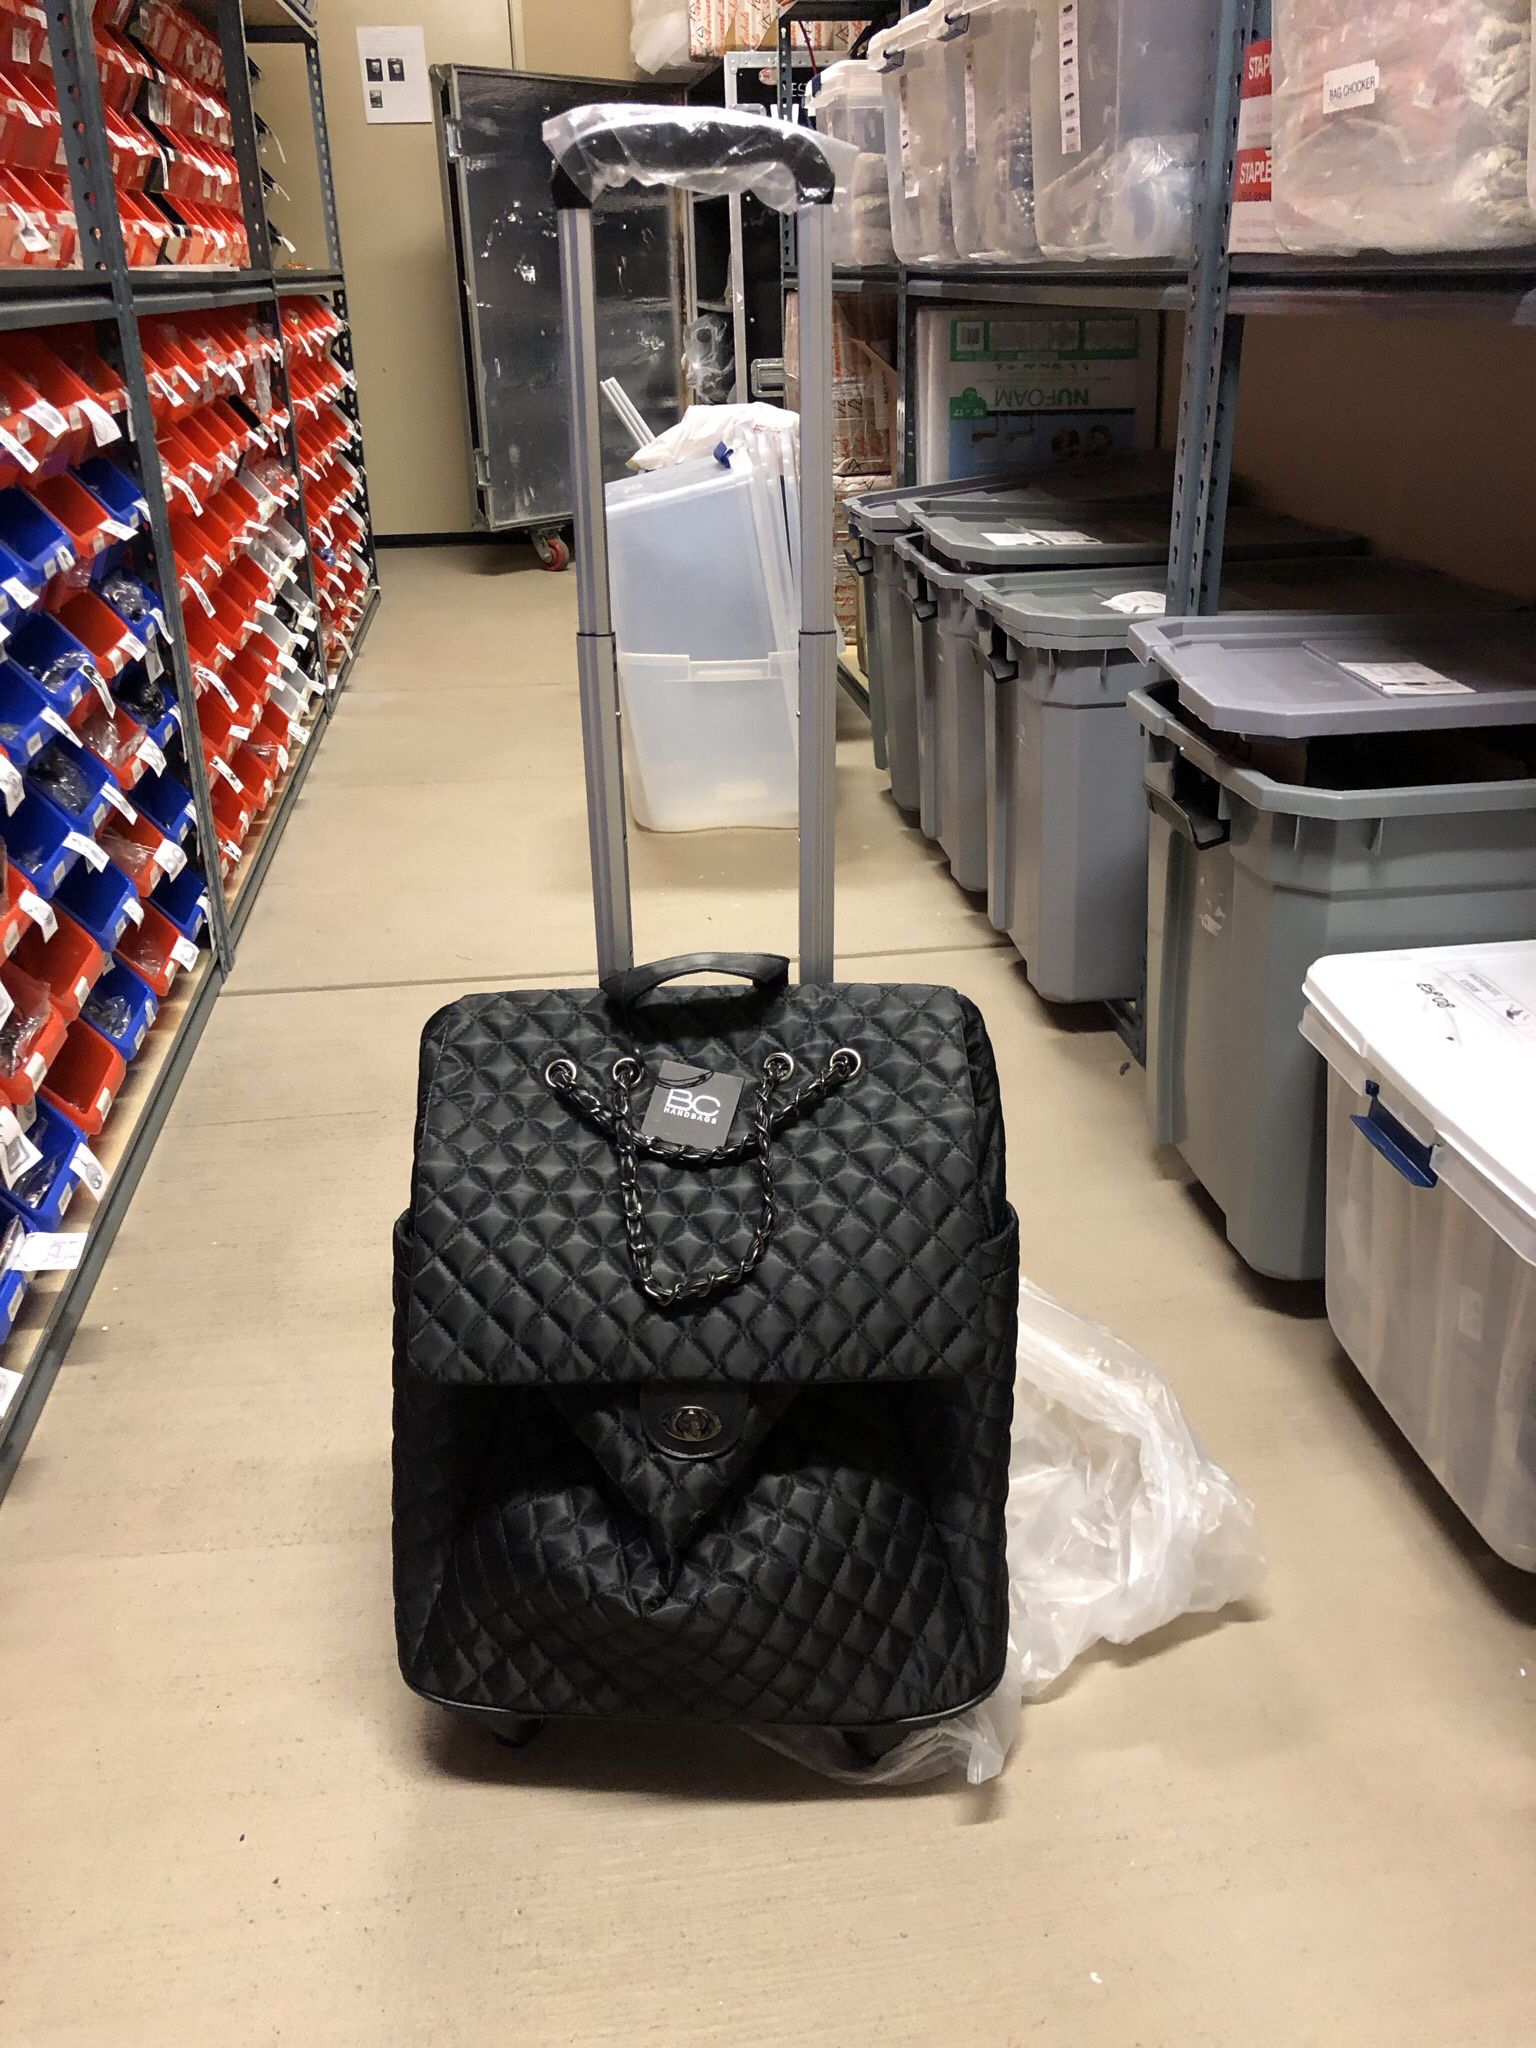 Luggage Trolley Stile Chanel Bag for Sale in Tustin, CA - OfferUp